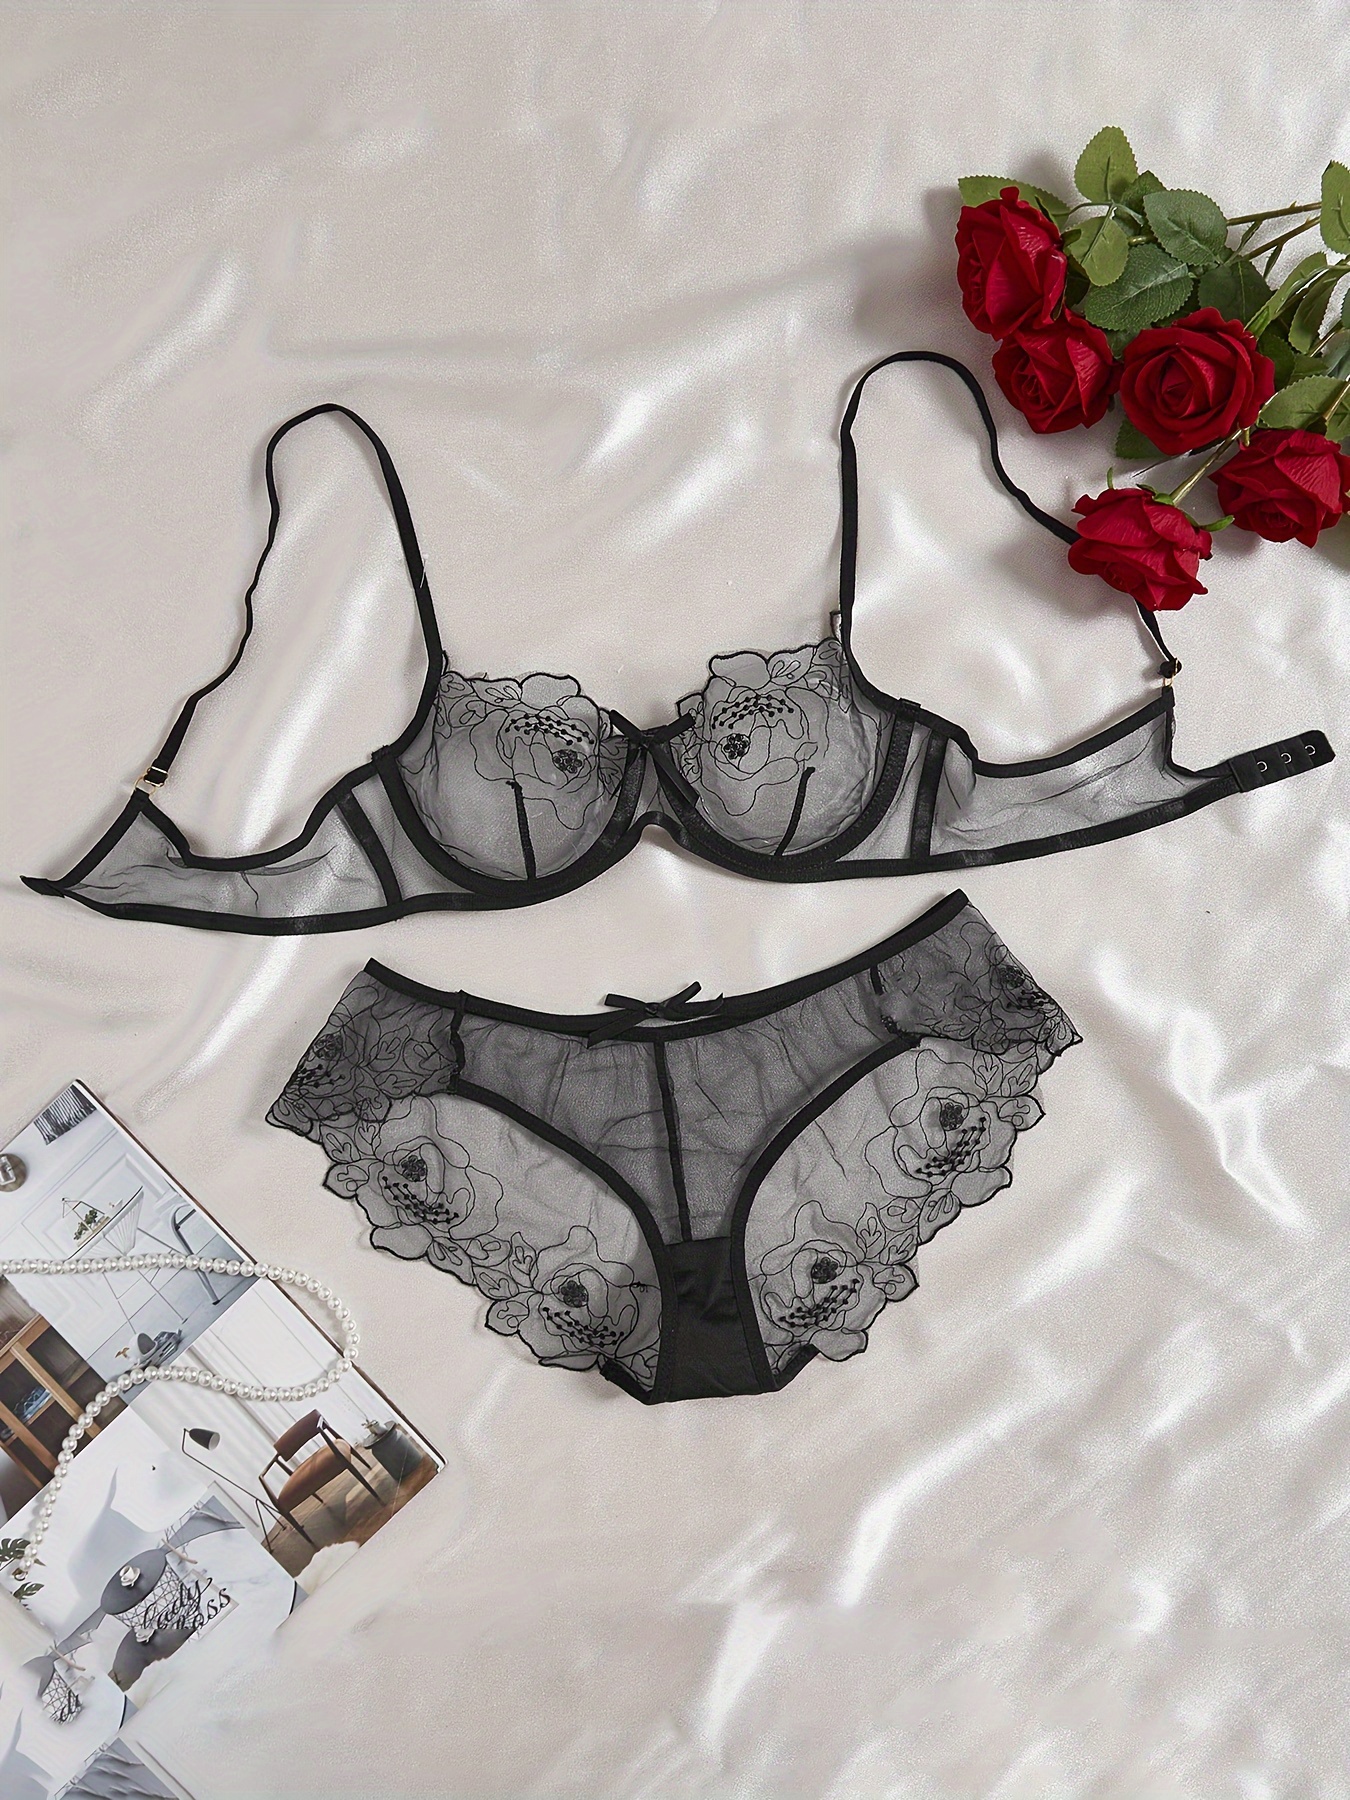 Floral Mesh Trim Lingerie Set - Sexy Sheer Bra and Panty for Women,  Seductive Underwear with Skimpy Design